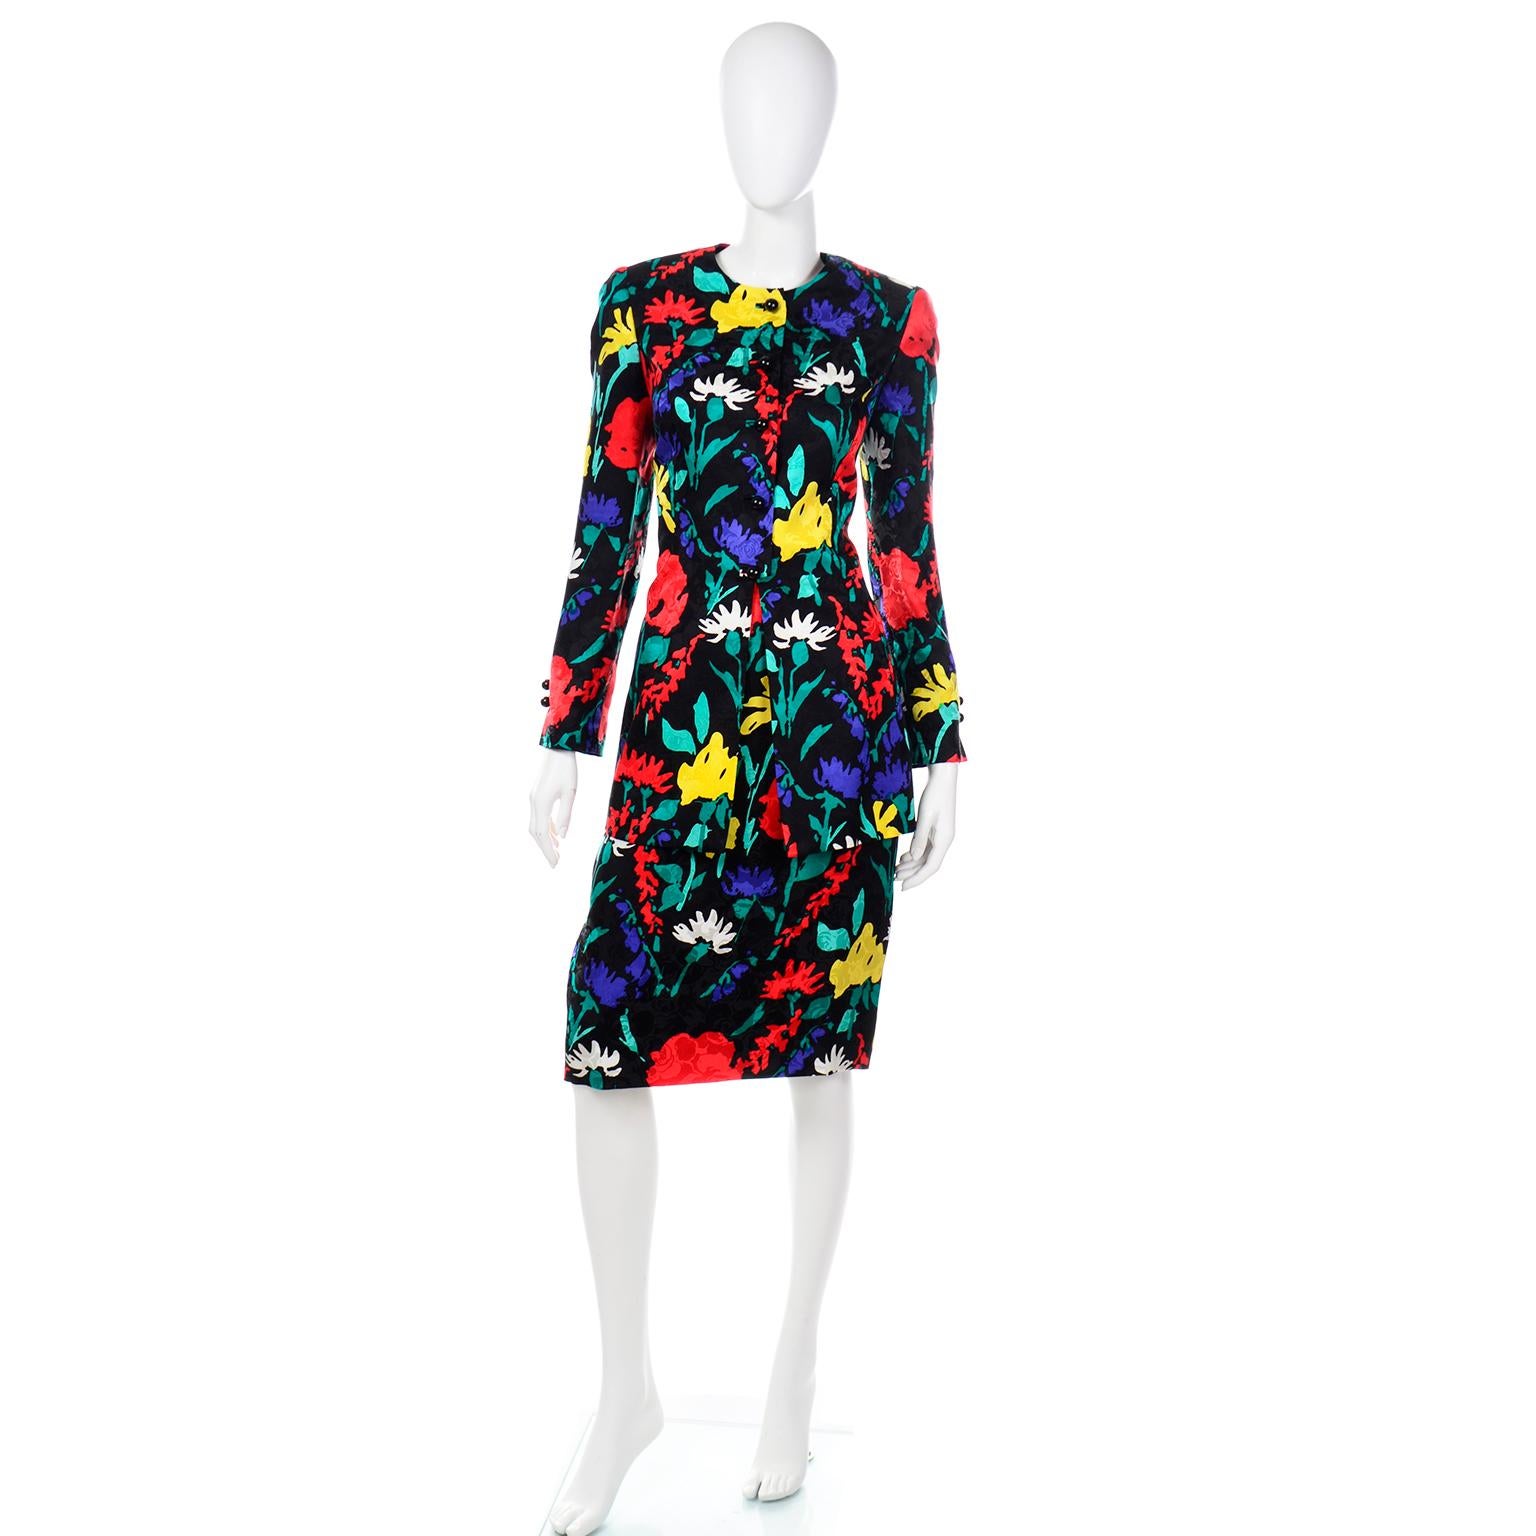 We love vintage David Hayes and if you've never owned any of his pieces, you will LOVE the high quality fabrics and detailed construction found in his collections! This is in a fabulous bold, colorful floral print in shades of yellow, white, red,